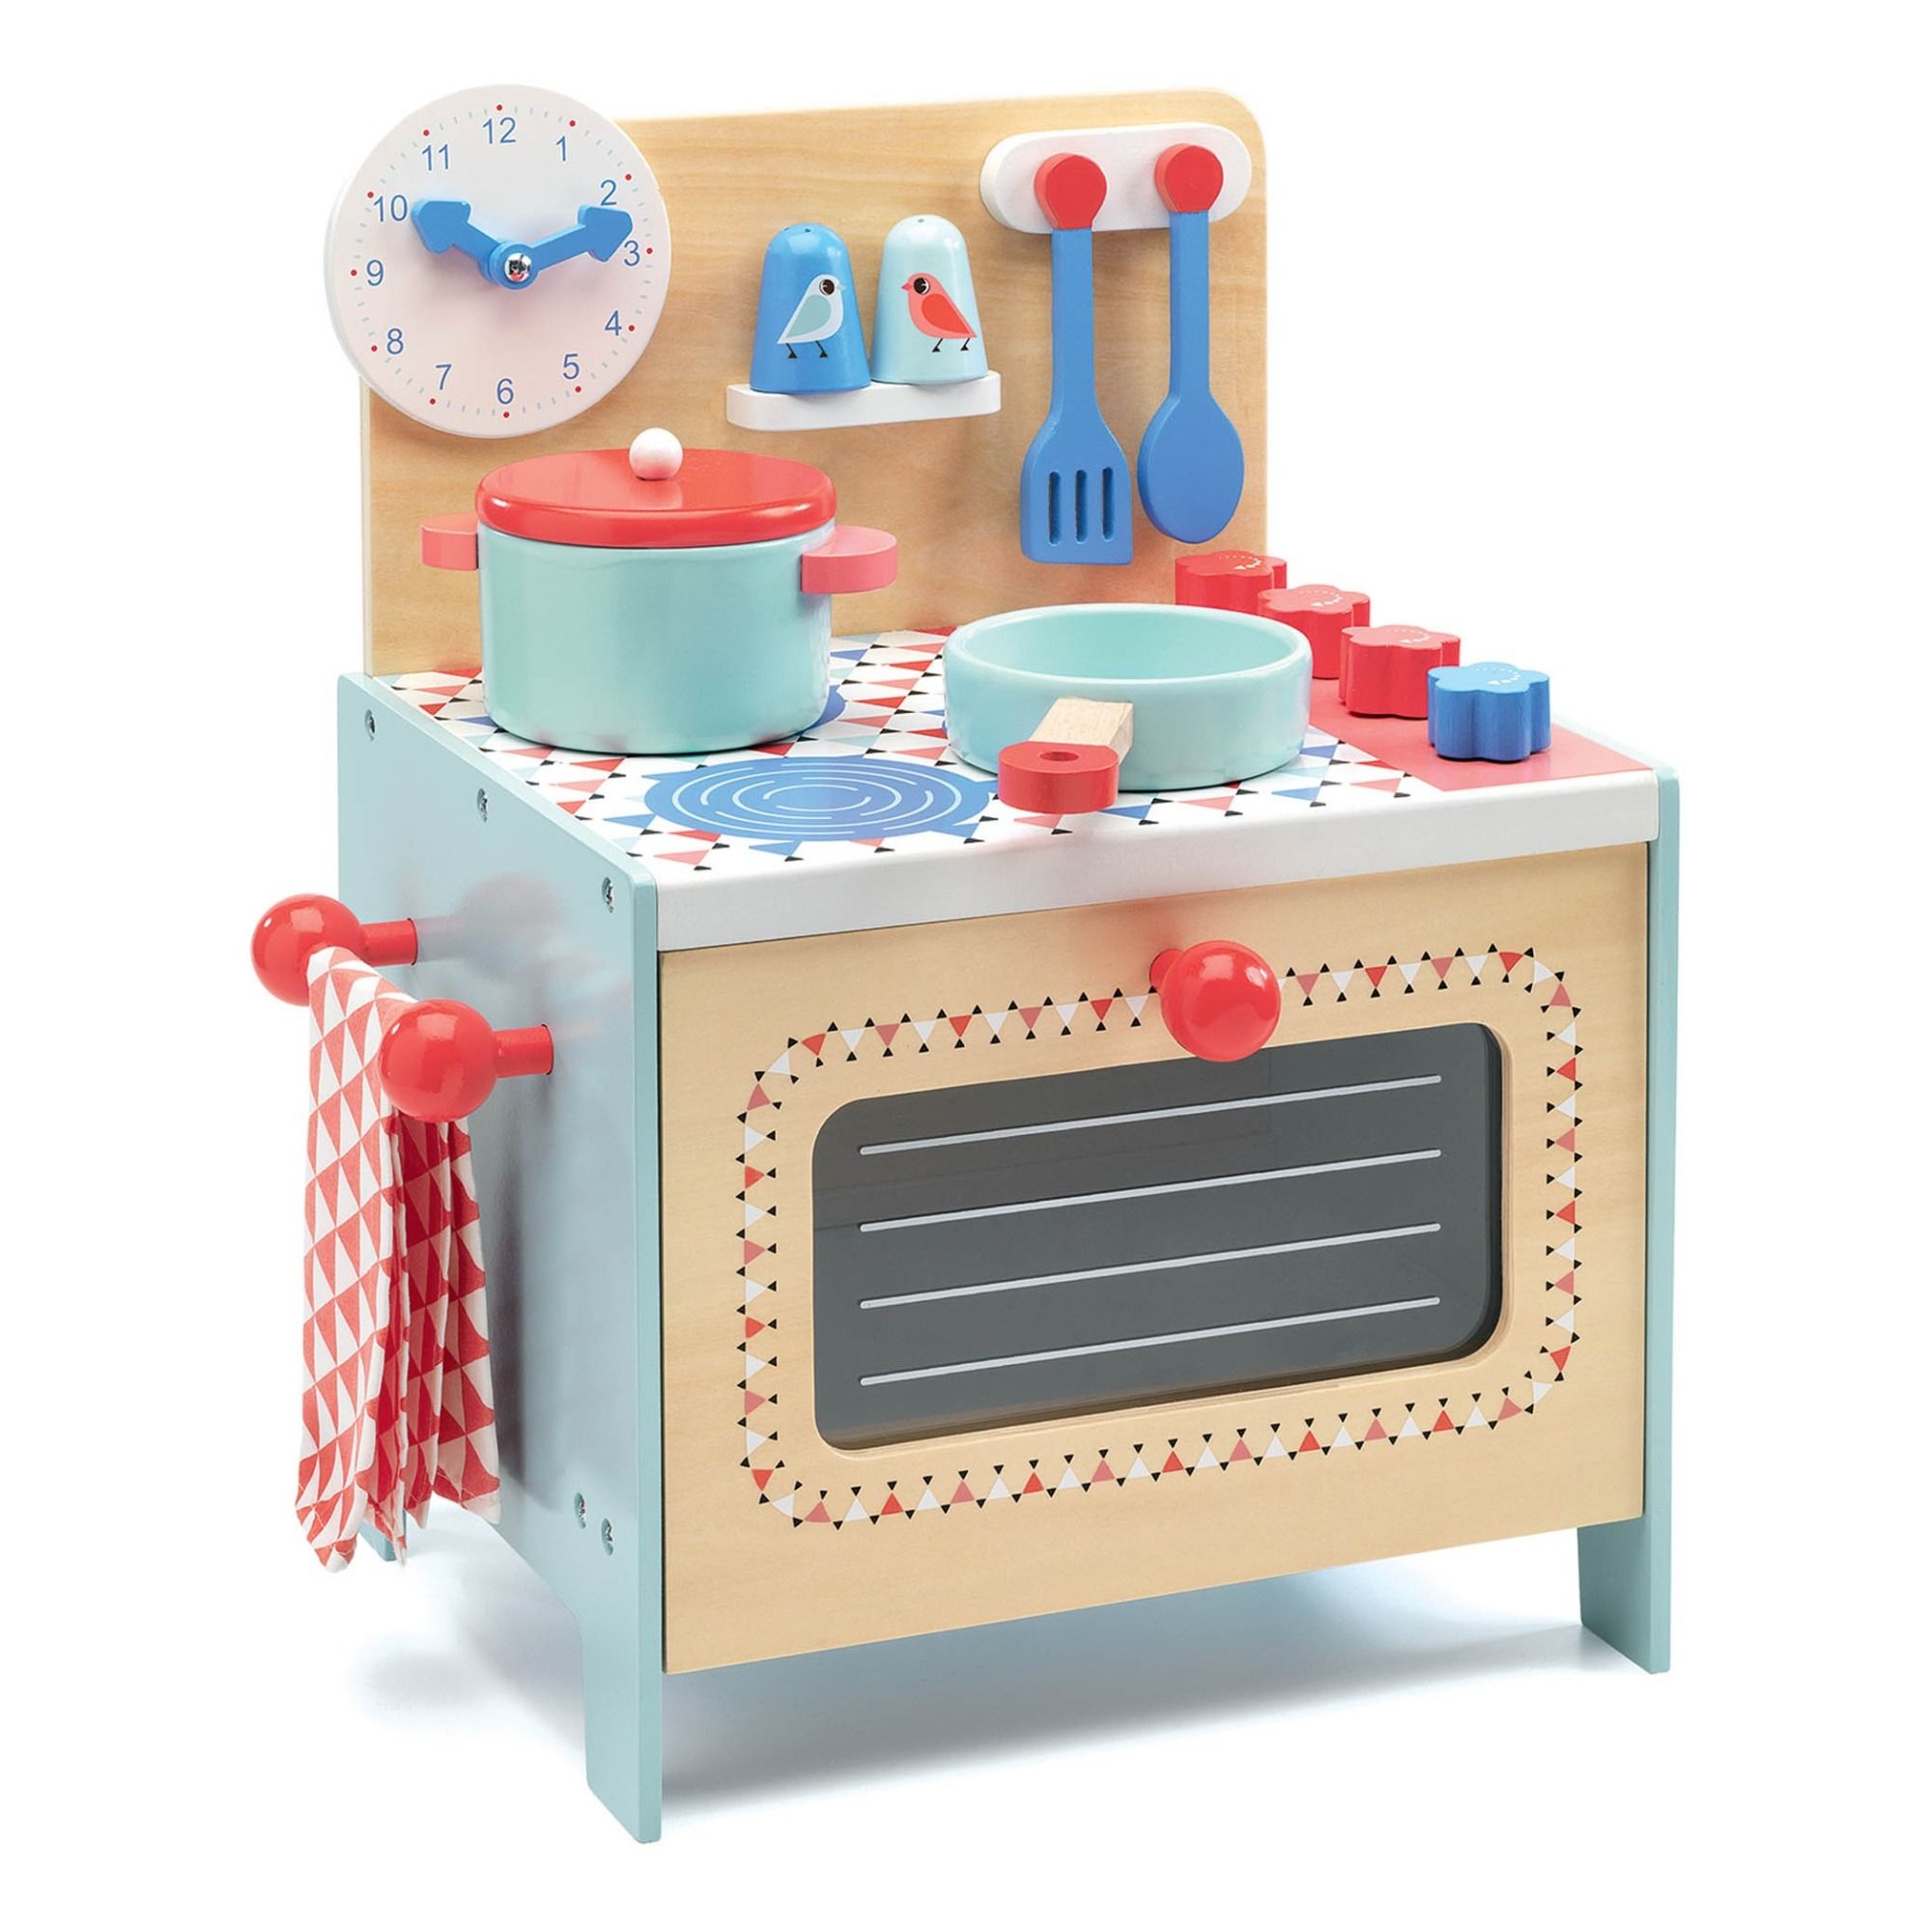 Wooden Kitchen Toy Djeco Toys And Hobbies Children